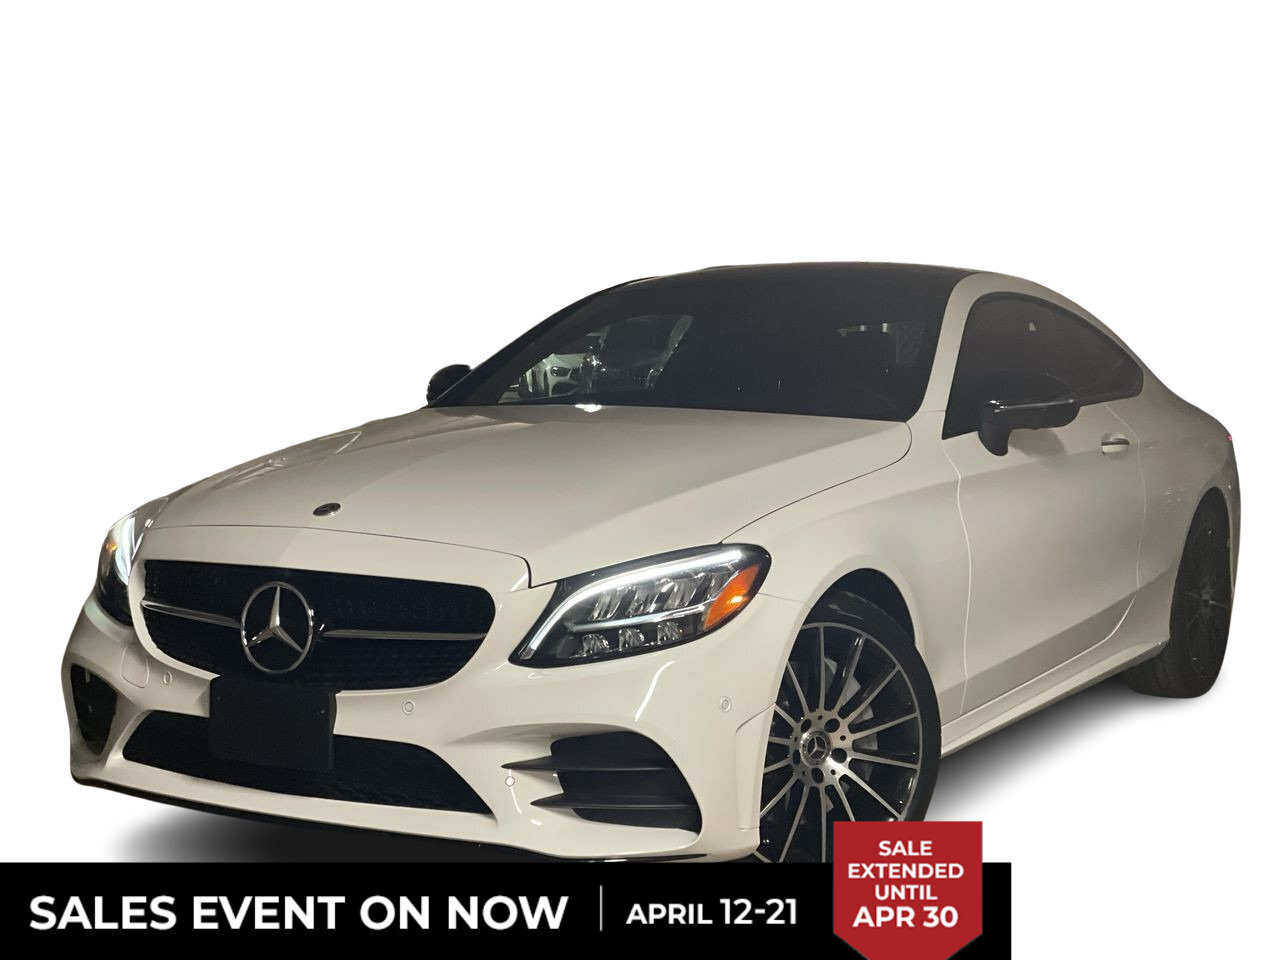 2023 Mercedes-Benz C-Class C 300 4MATIC Lease rates starting at 2.49%!